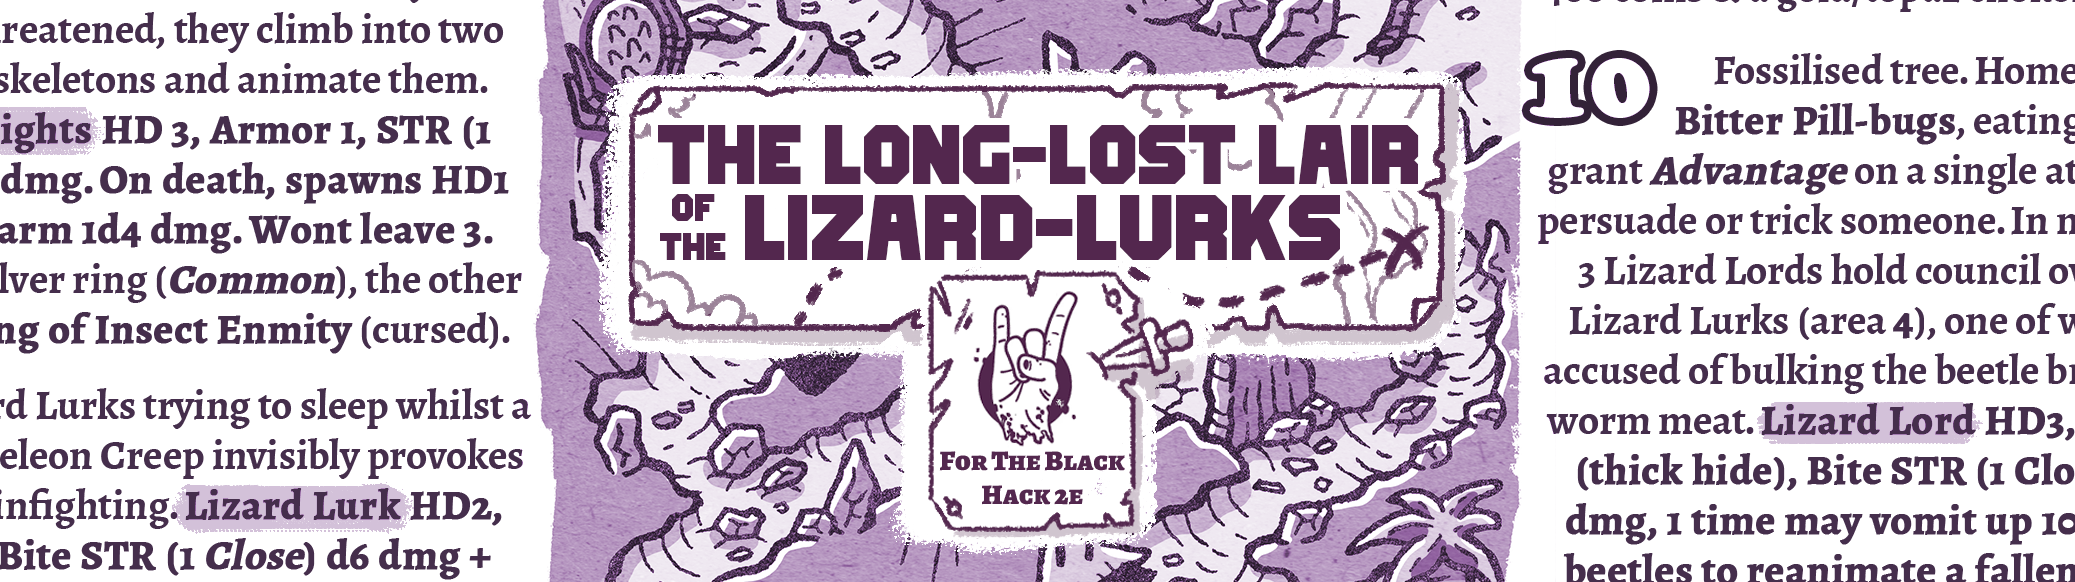 The Long-Lost Lair of the Lizard-Lurks